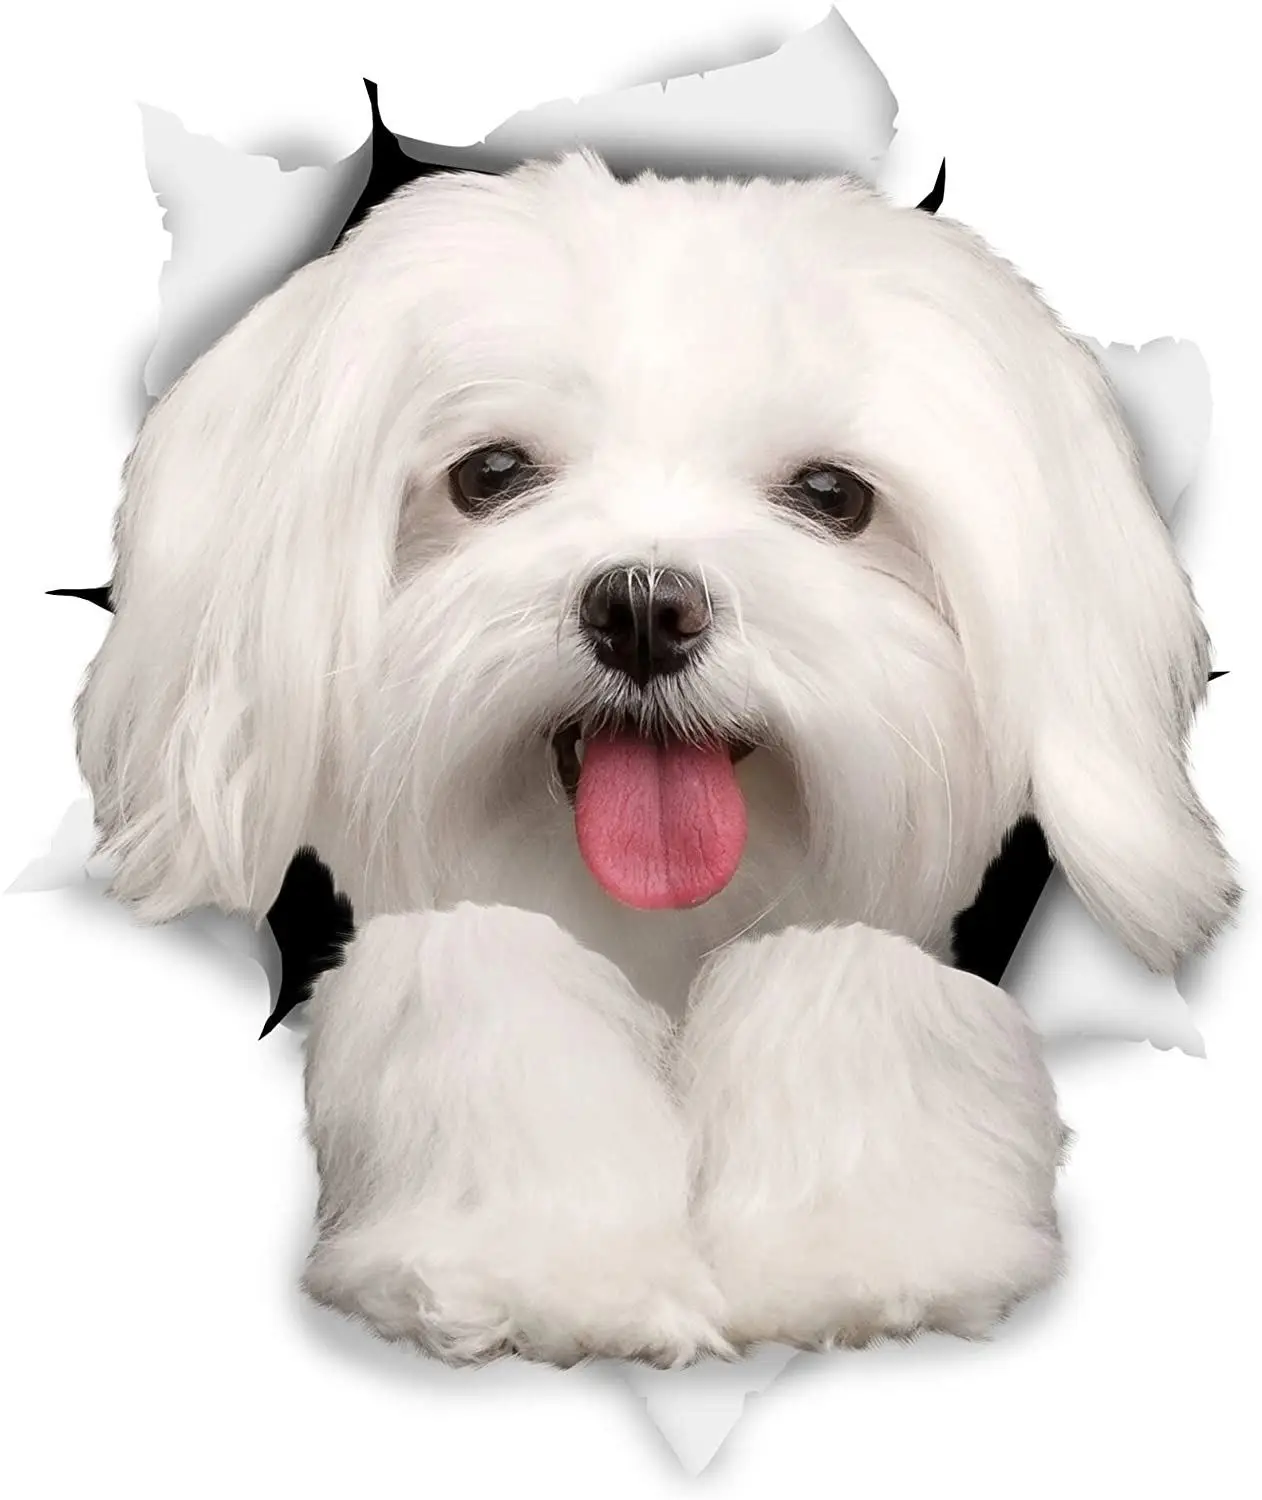 

DasDecal Cute Maltese Dog Car Sticker Decoration Cover Scratch Decal Laptop Truck Motorcycle Auto Accessories PVC,12cm*9cm